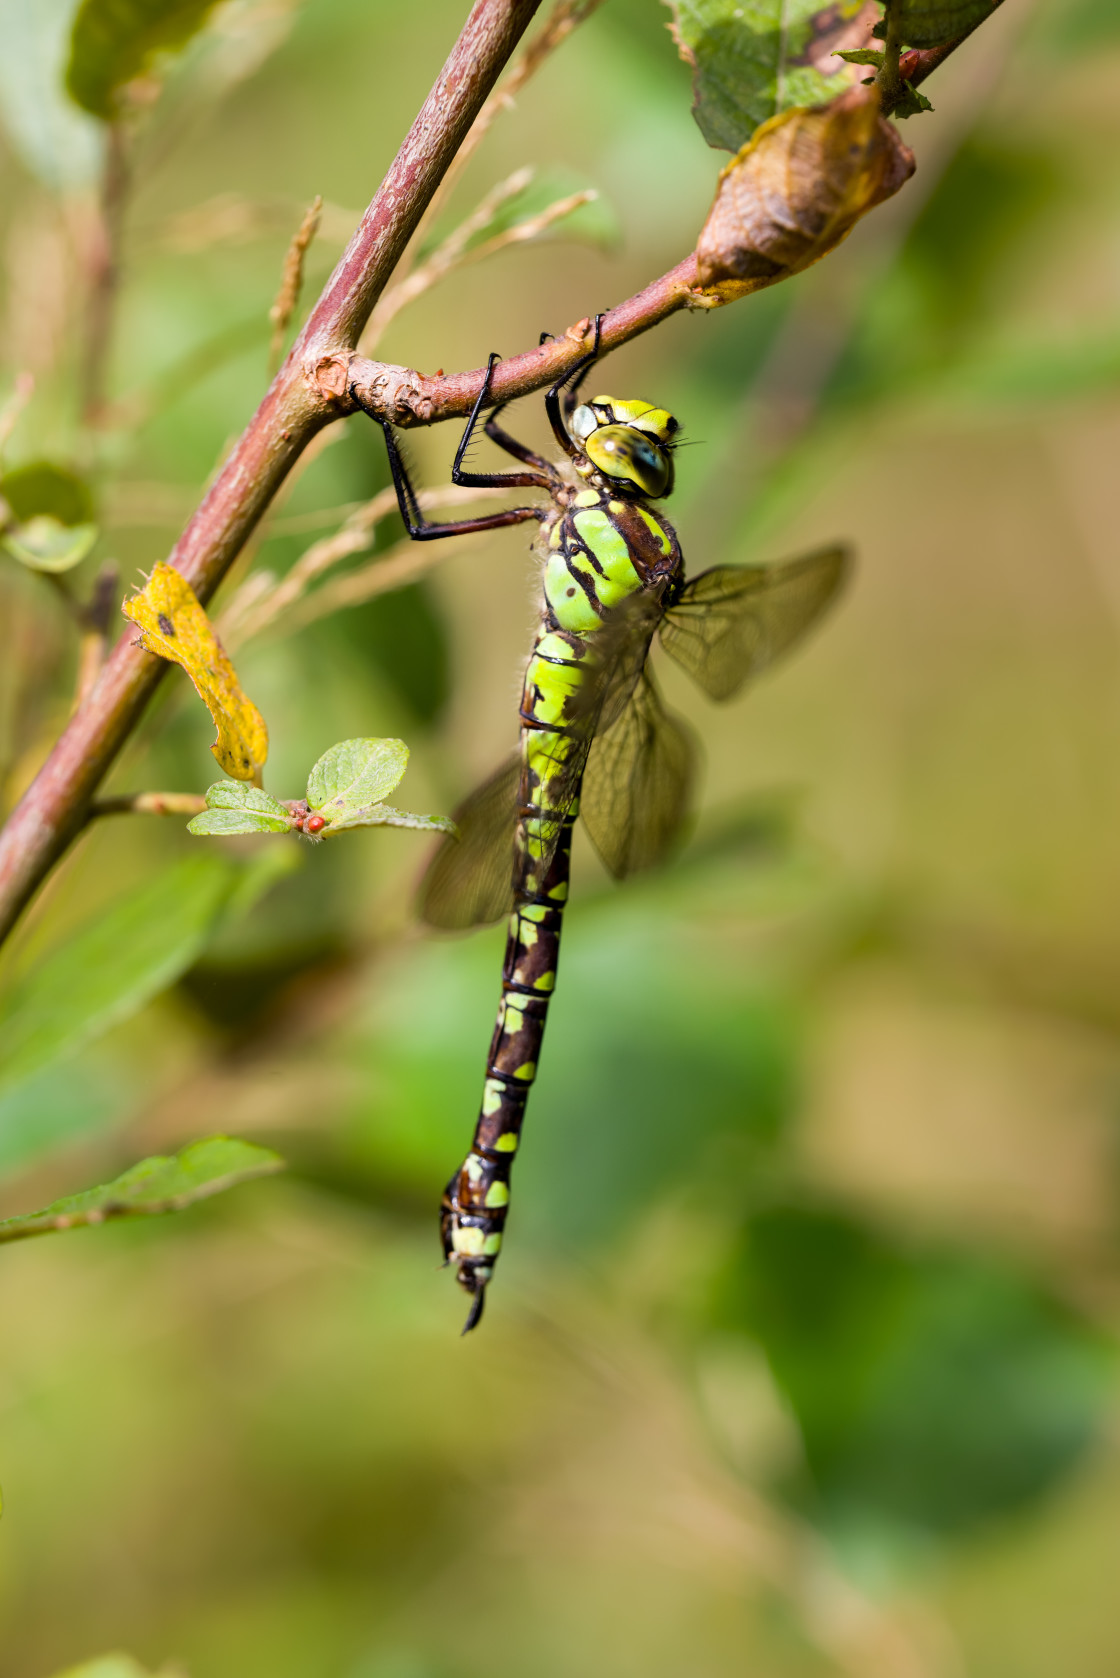 "Southern Hawker Dragonfly" stock image